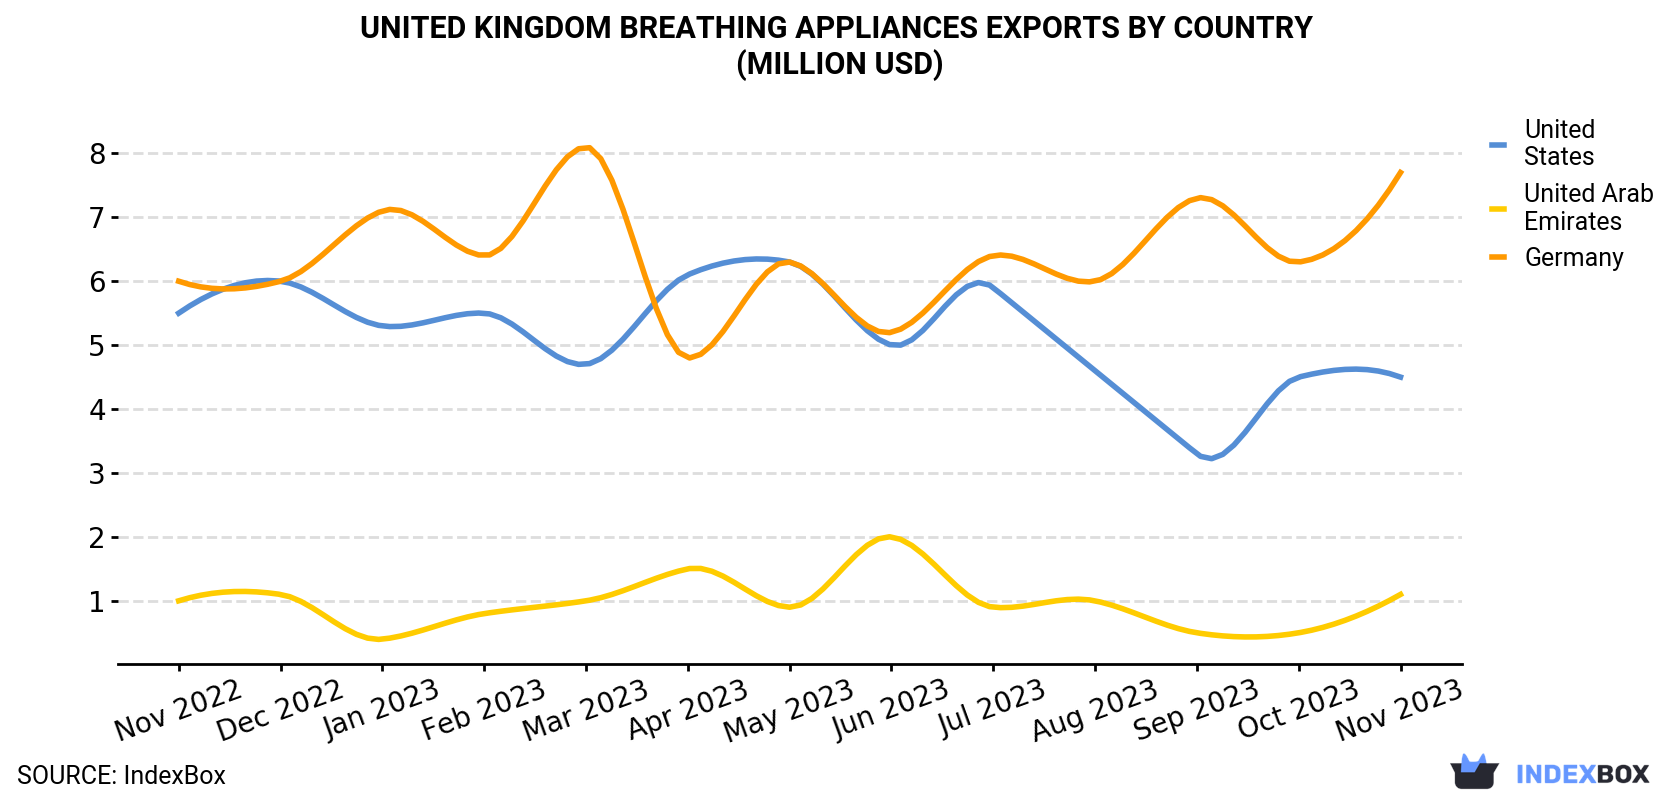 United Kingdom Breathing Appliances Exports By Country (Million USD)